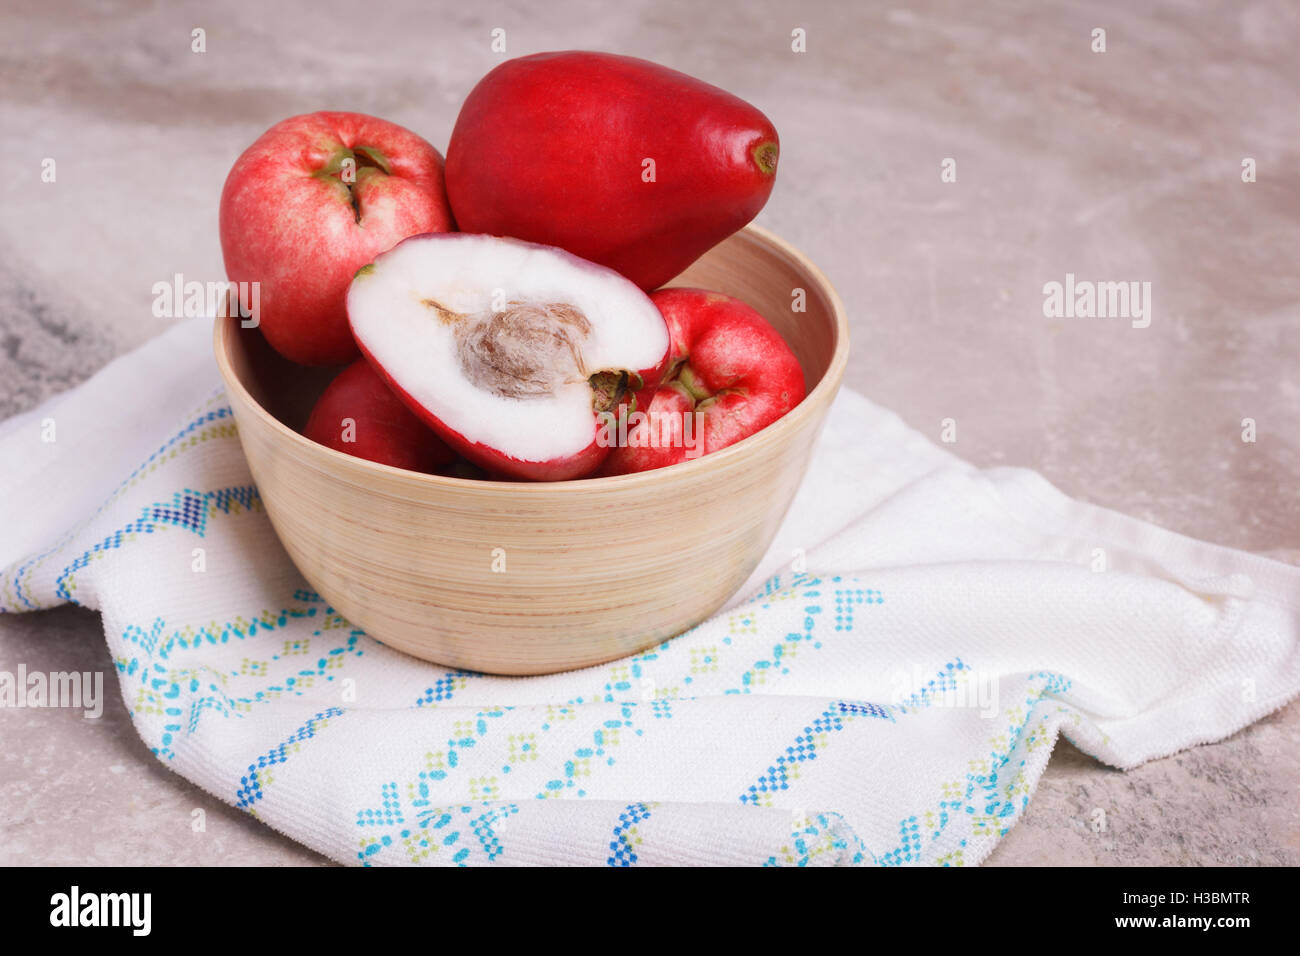 Tropical fruit Acmella oleracea (toothache plant, paracress, electric daisy, jambu) in wooden bowl on marble table. Stock Photo